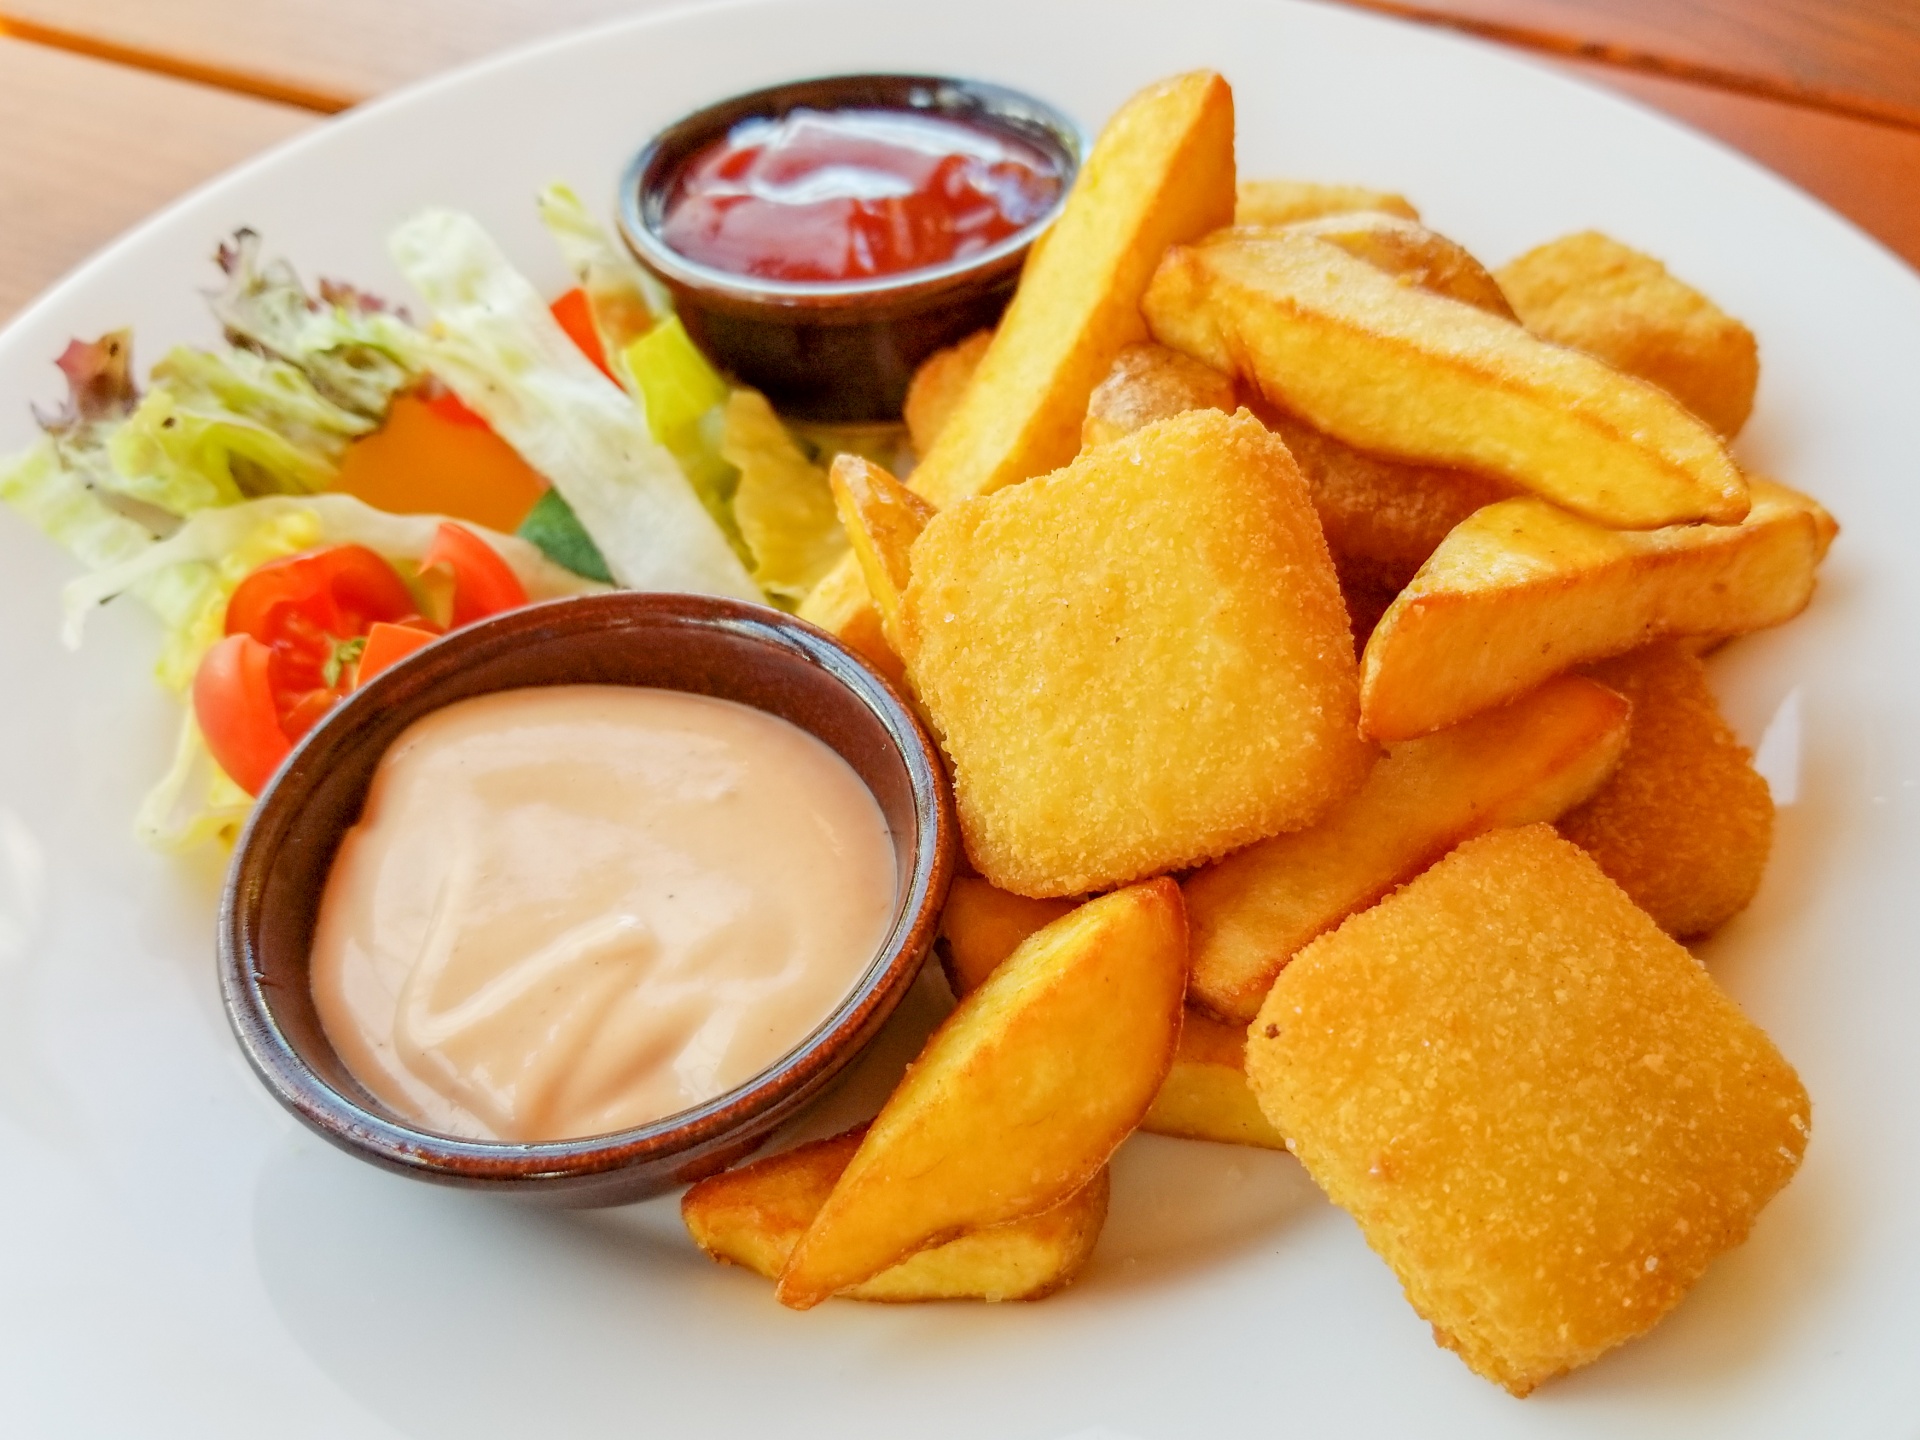 fried-cheese-and-chips-1530626820ixc.jpeg